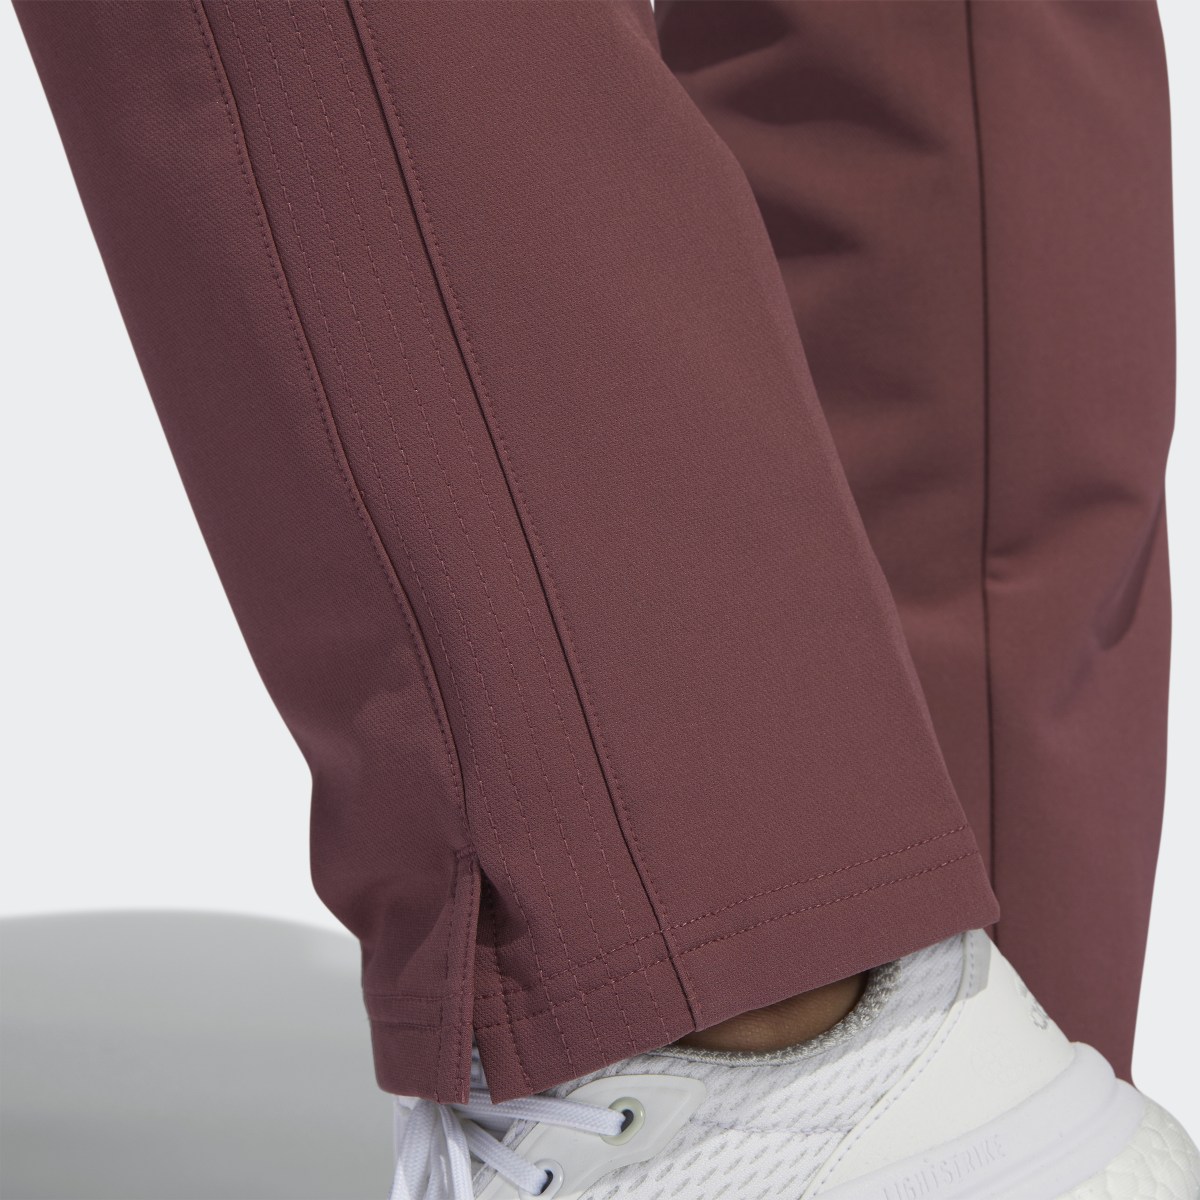 Adidas Winter Weight Pull-On Golf Pants. 7